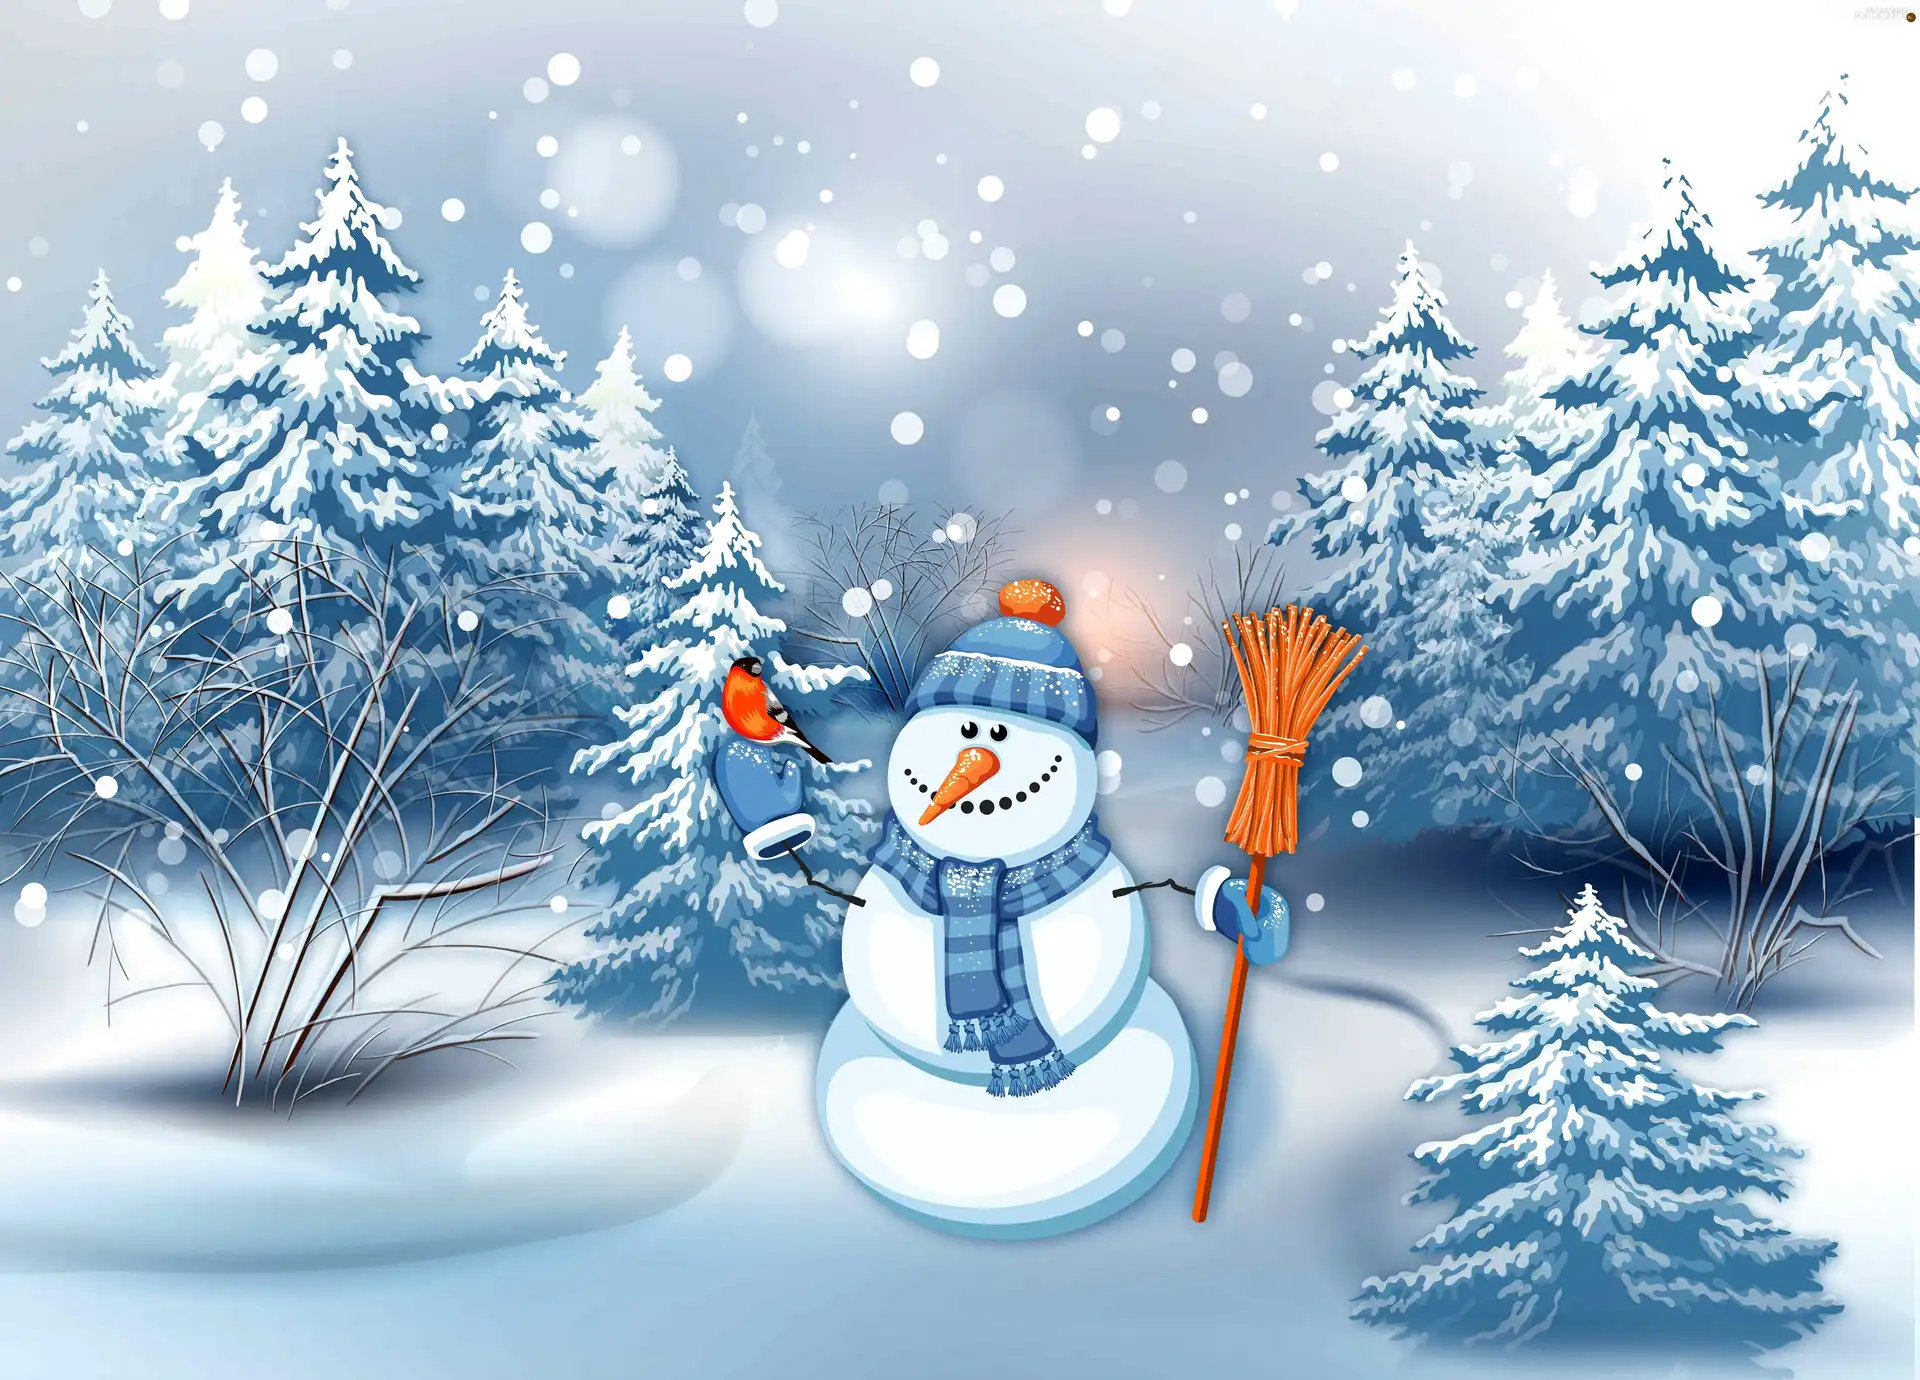 Snowy, winter, viewes, snow, trees, Snowman